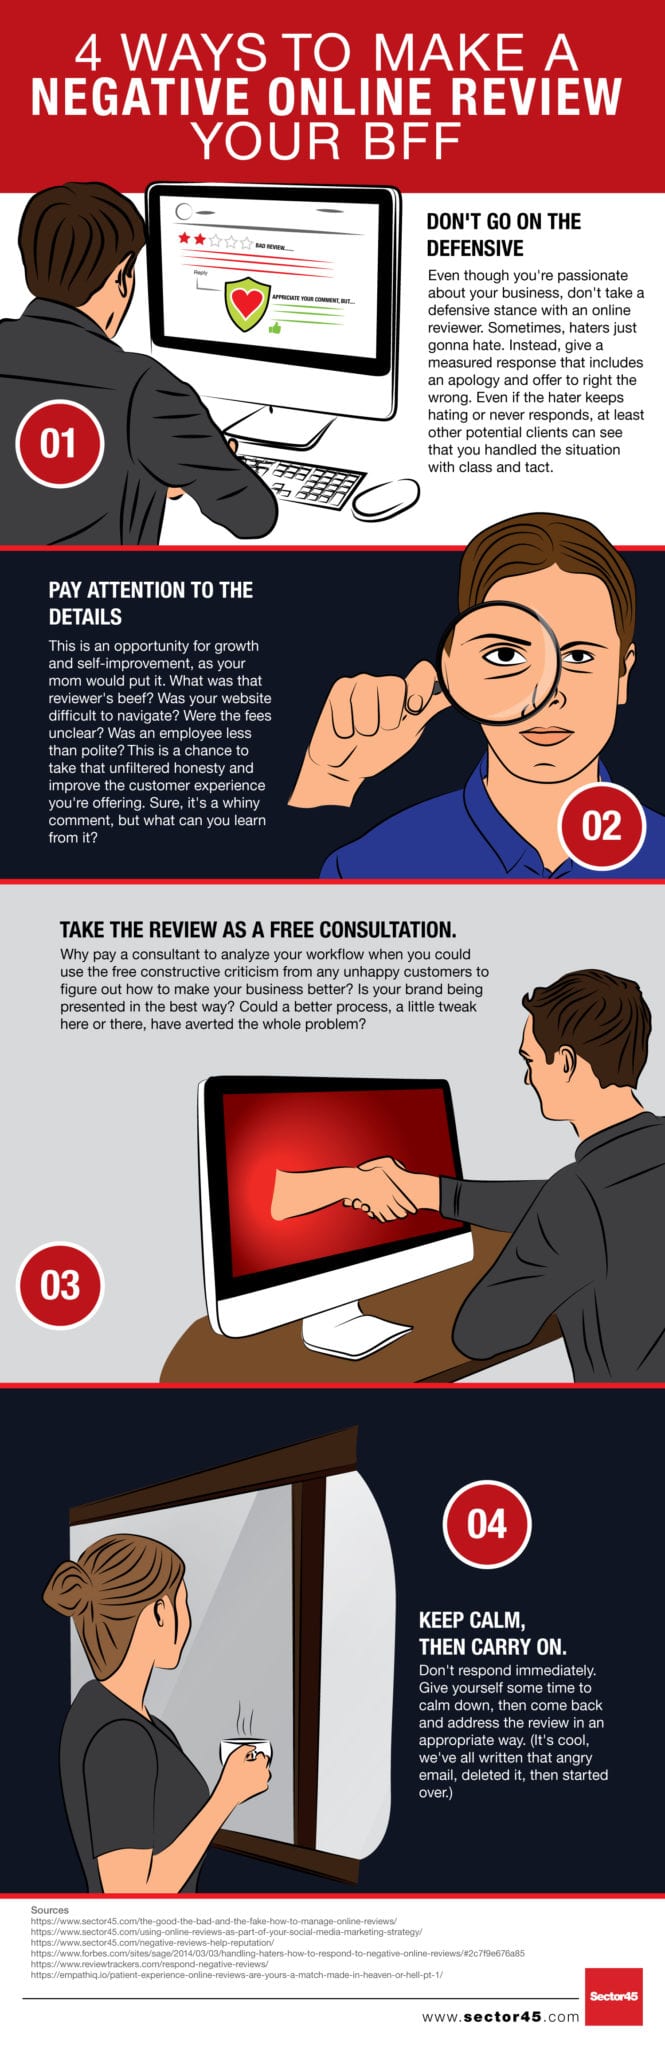 infographic about negative online reviews